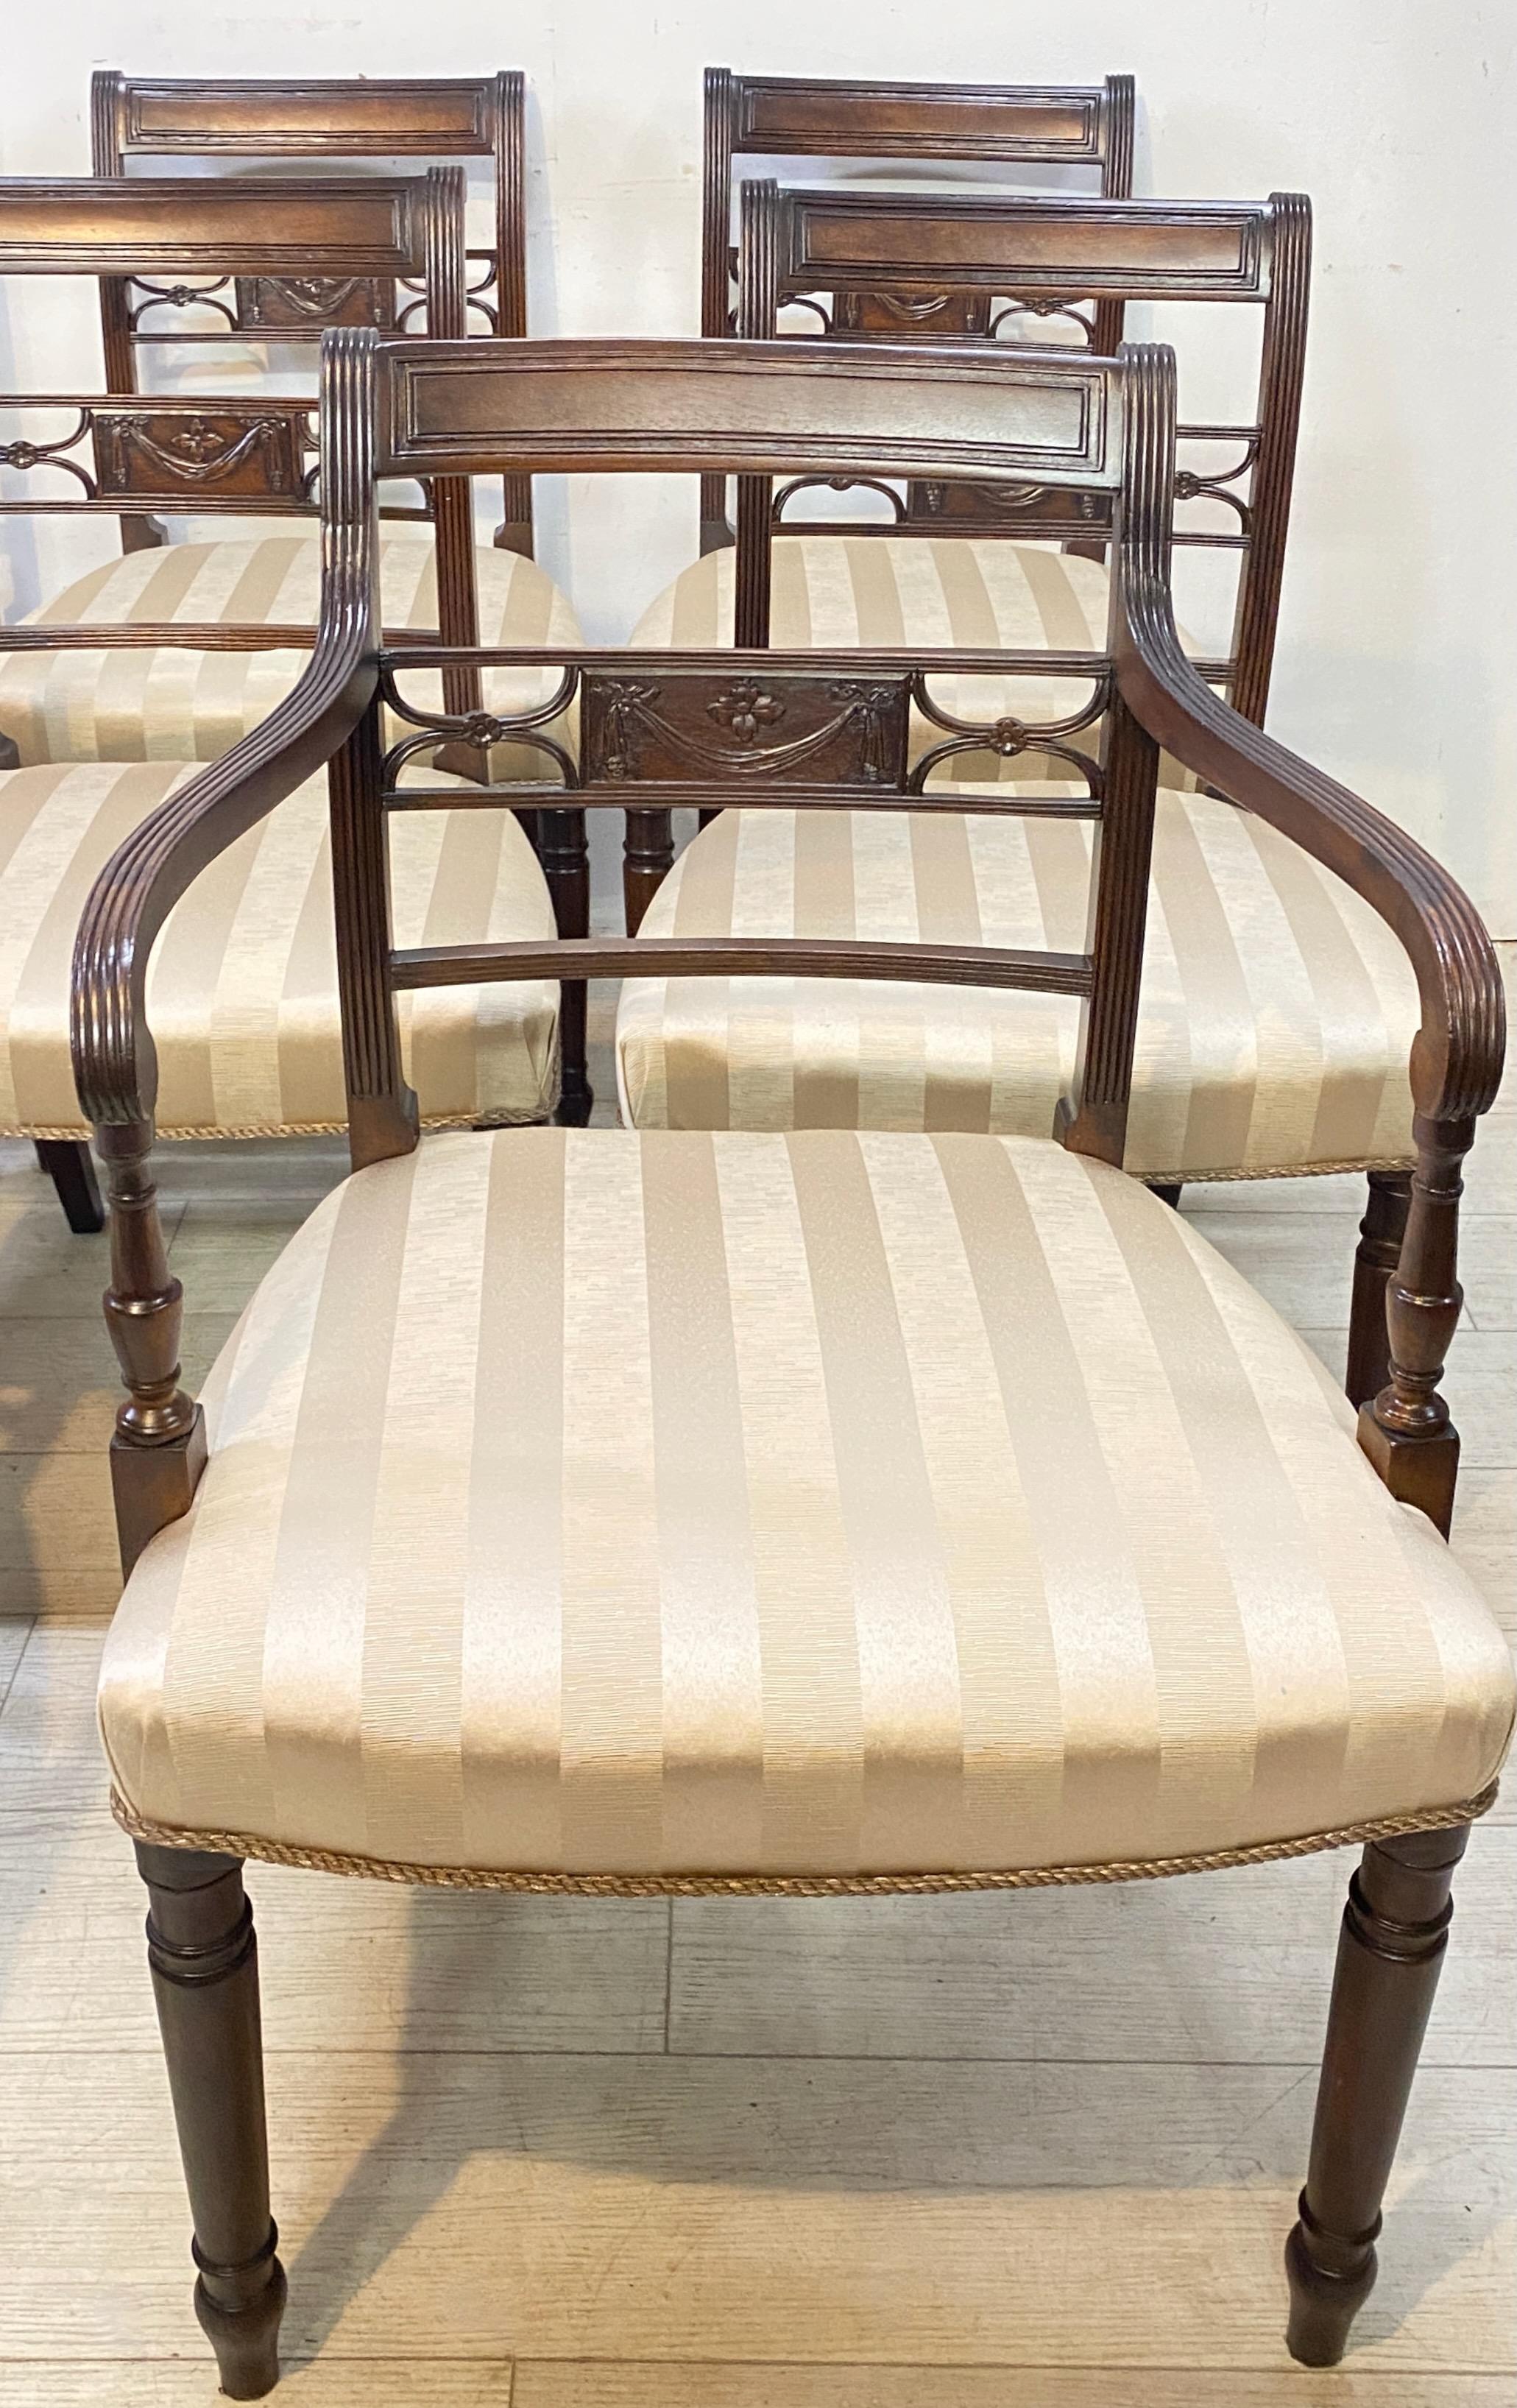 Set of 8 English George III Mahogany Dining Chairs, Early 19th Century For Sale 6